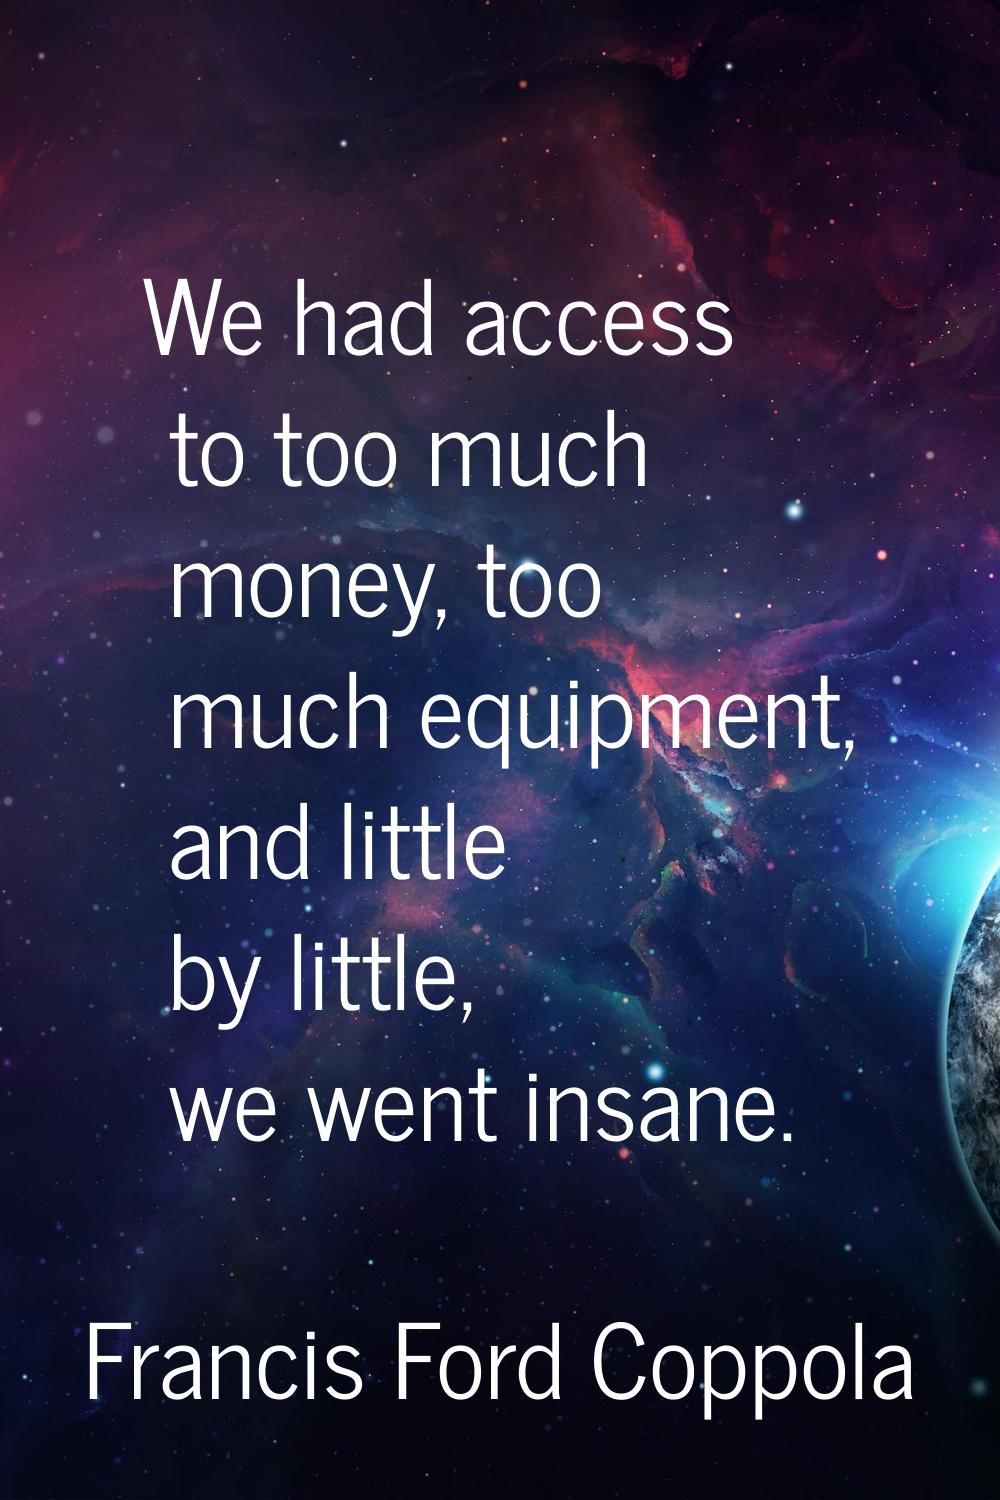 We had access to too much money, too much equipment, and little by little, we went insane.